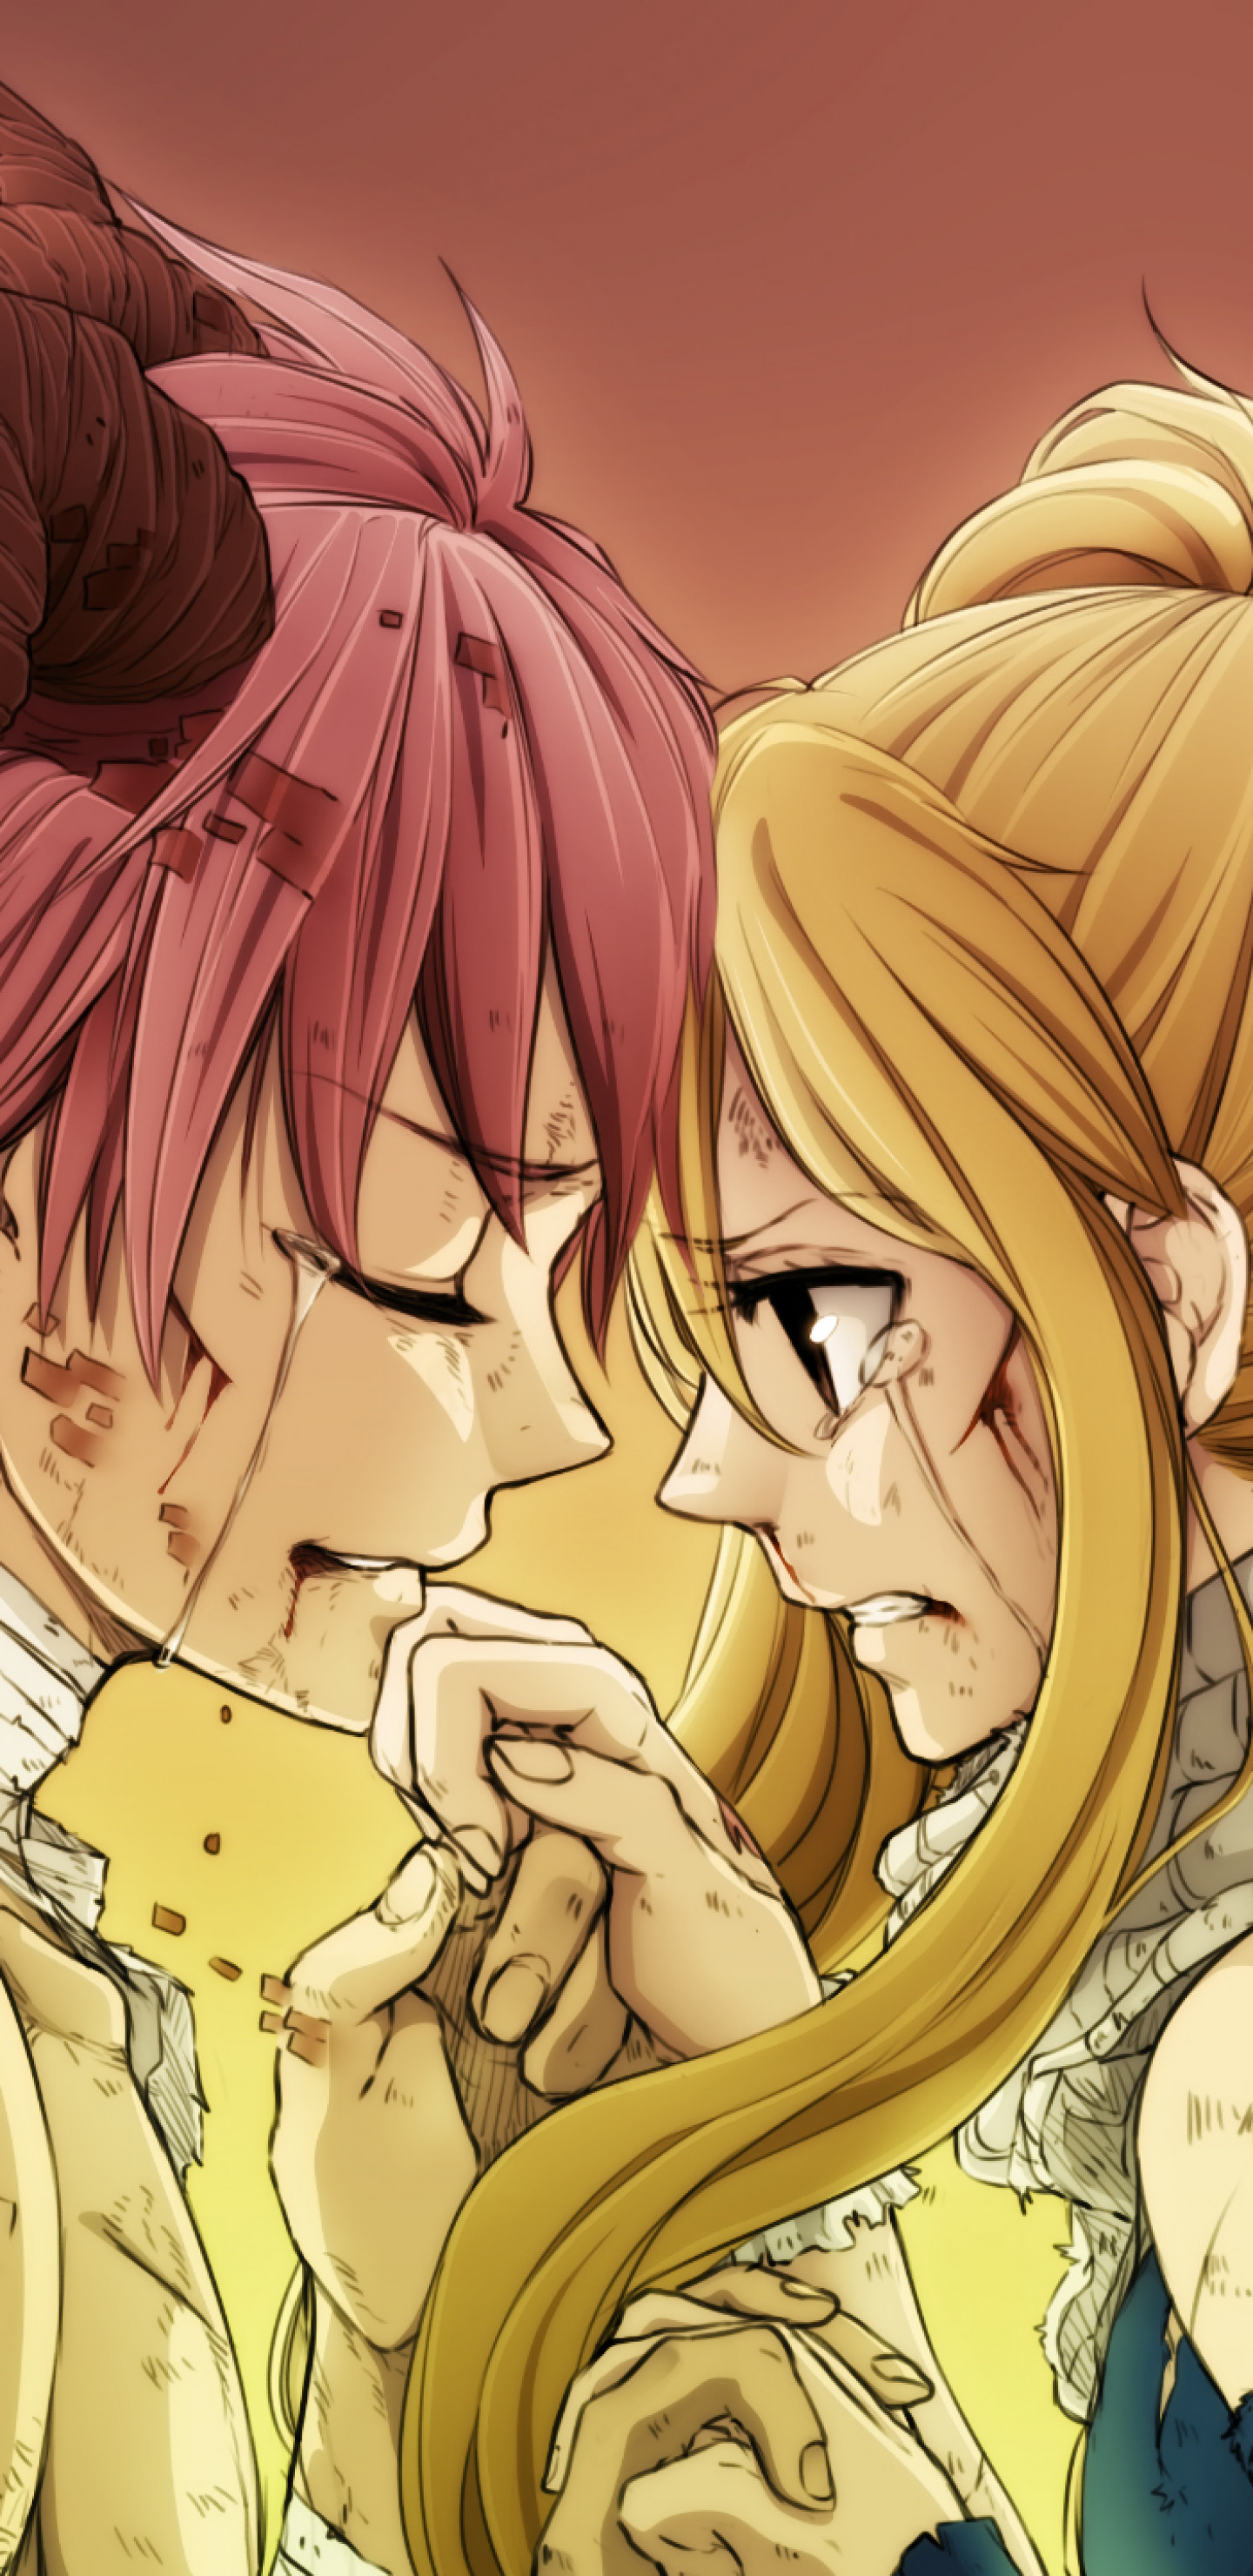 1440x2960 Natsu X Lucy, Fairy Tail, Tears, Scarf, After Fight